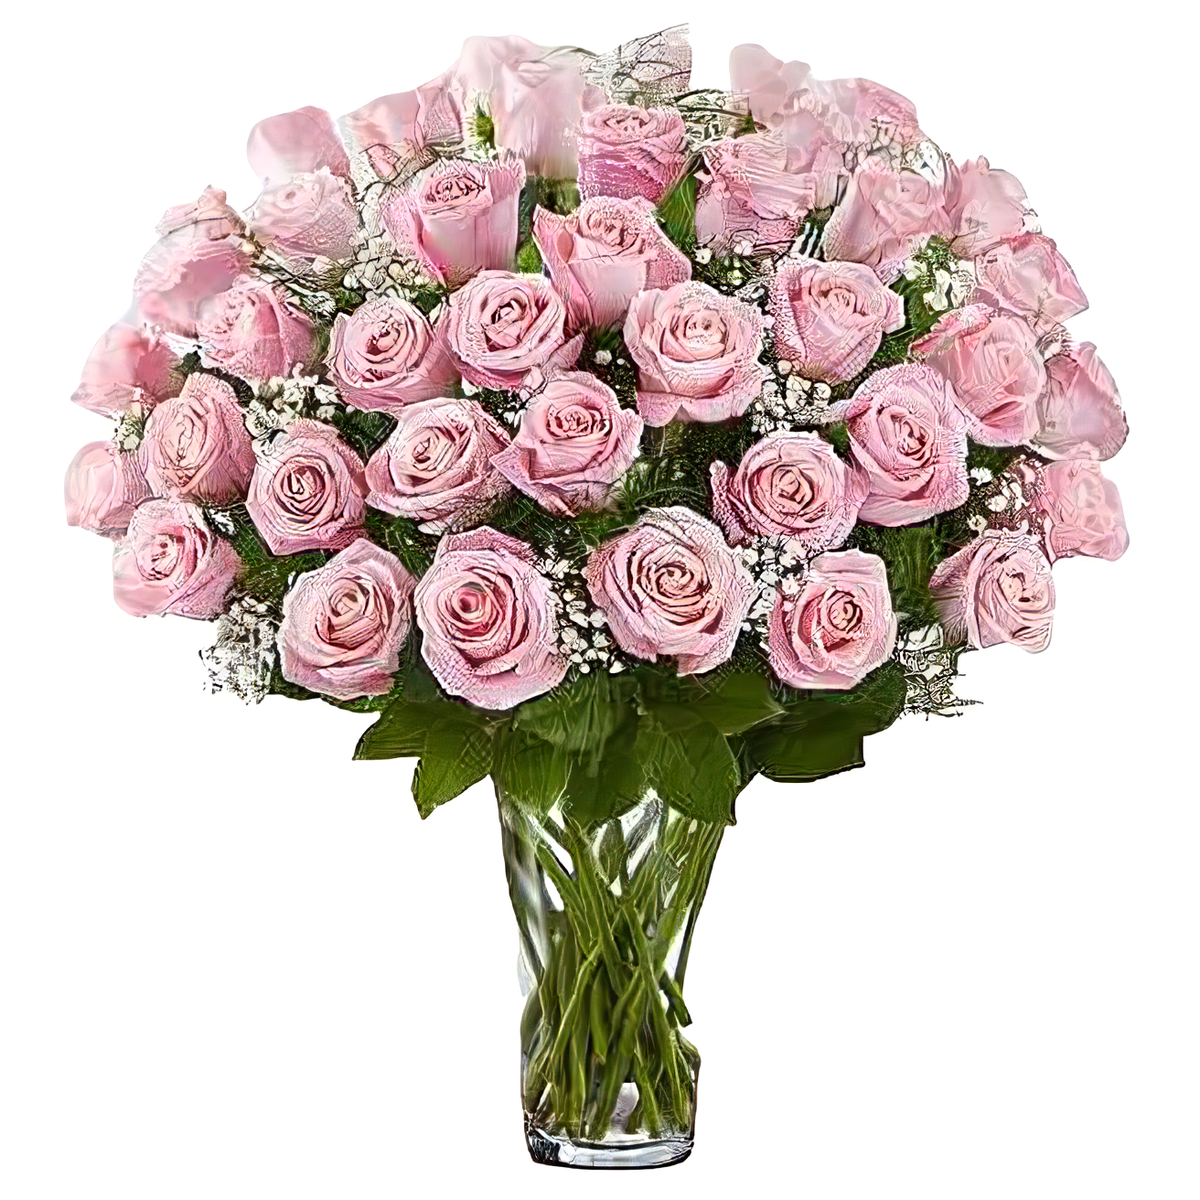 Queens Flower Delivery - Premium Long Stem 48 Pink Roses